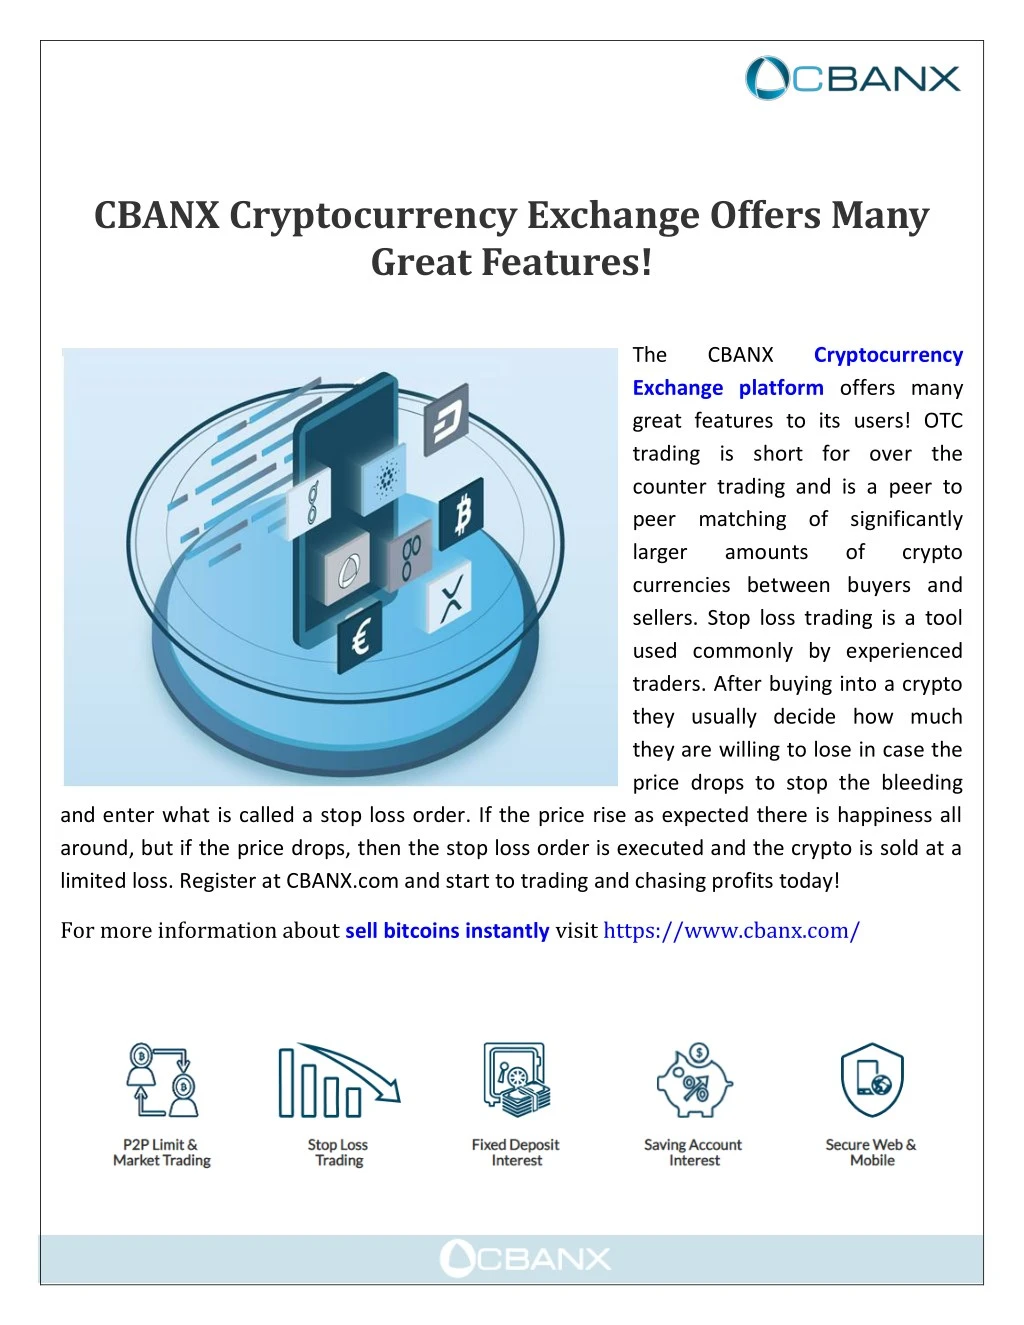 cbanx cryptocurrency exchange offers many great